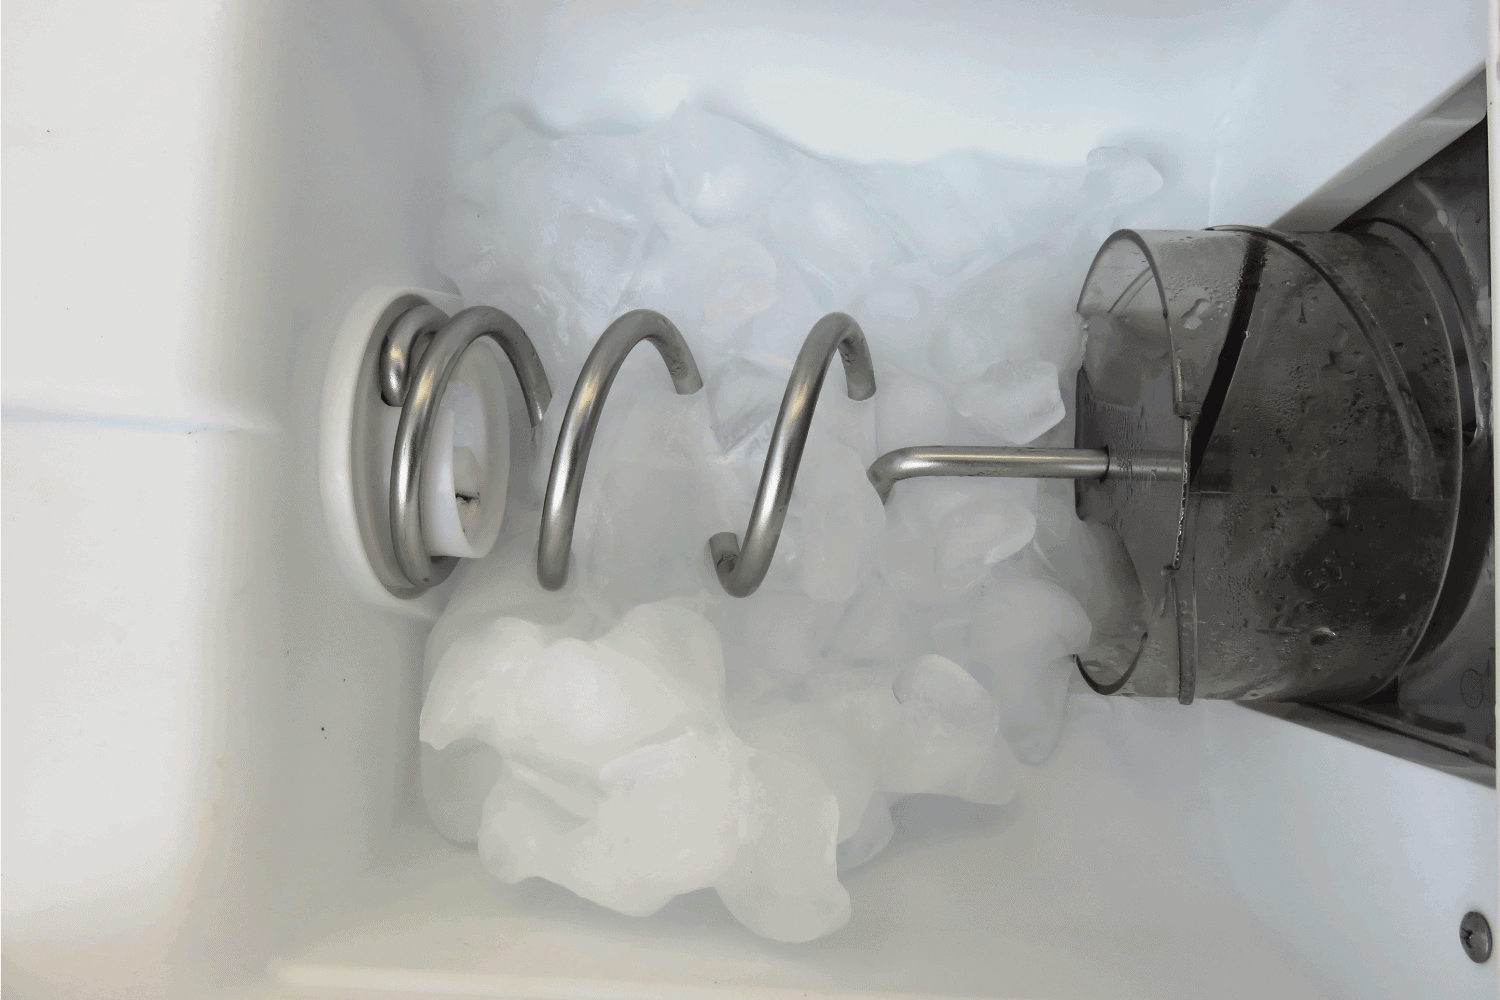 Icemaker in action